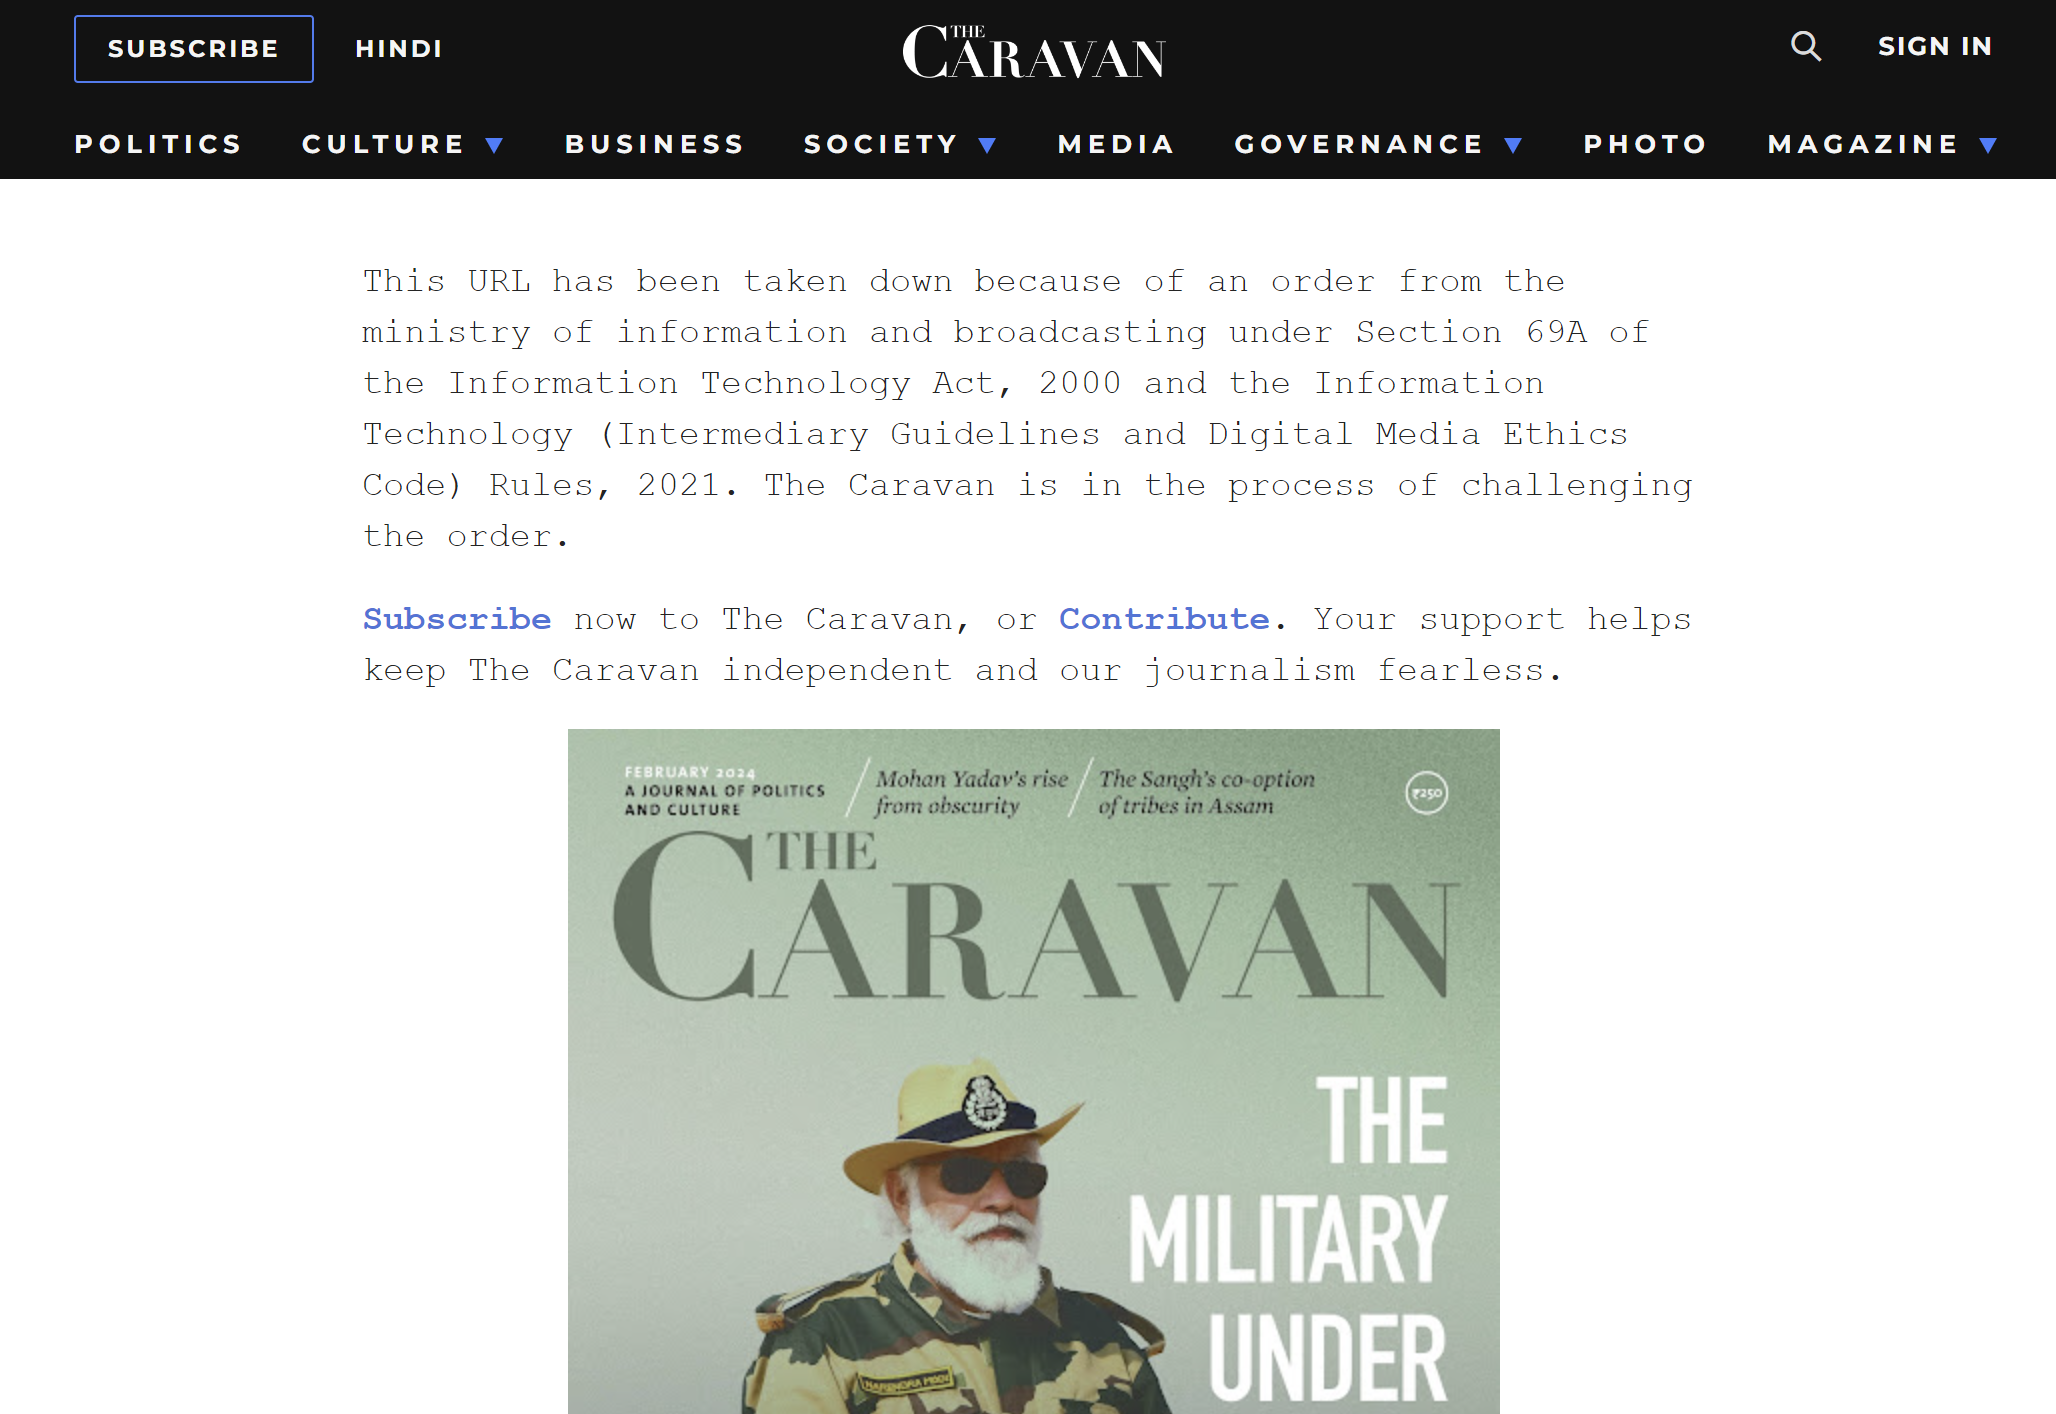 TheCaravanCensored - is a snapshot of the notification put up on The Caravan Magazine's censored report. 